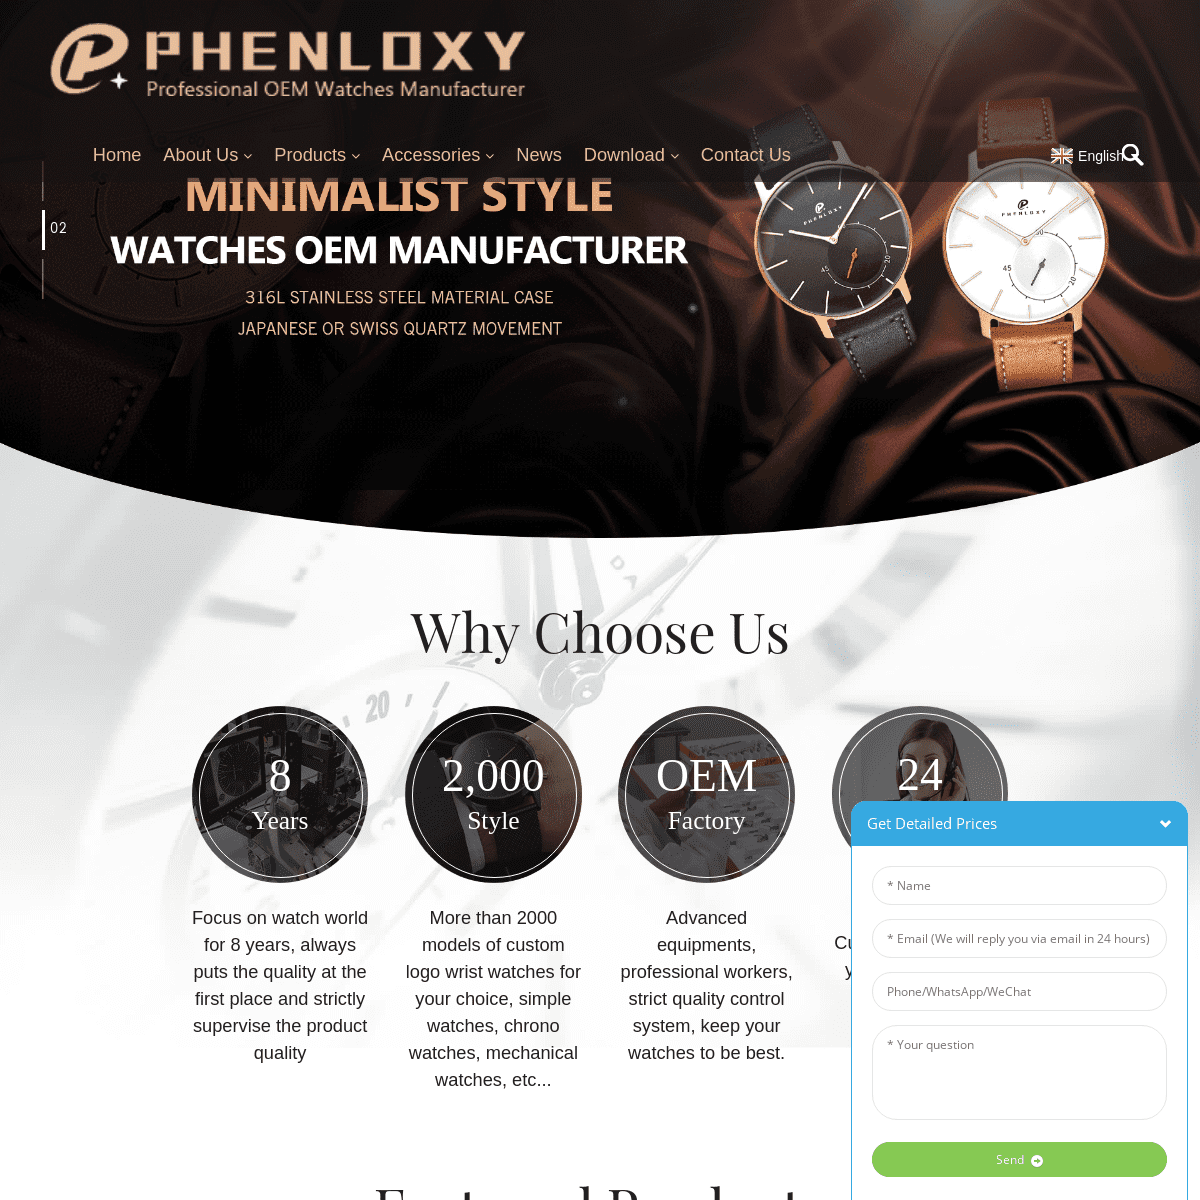 A complete backup of phenloxy.com